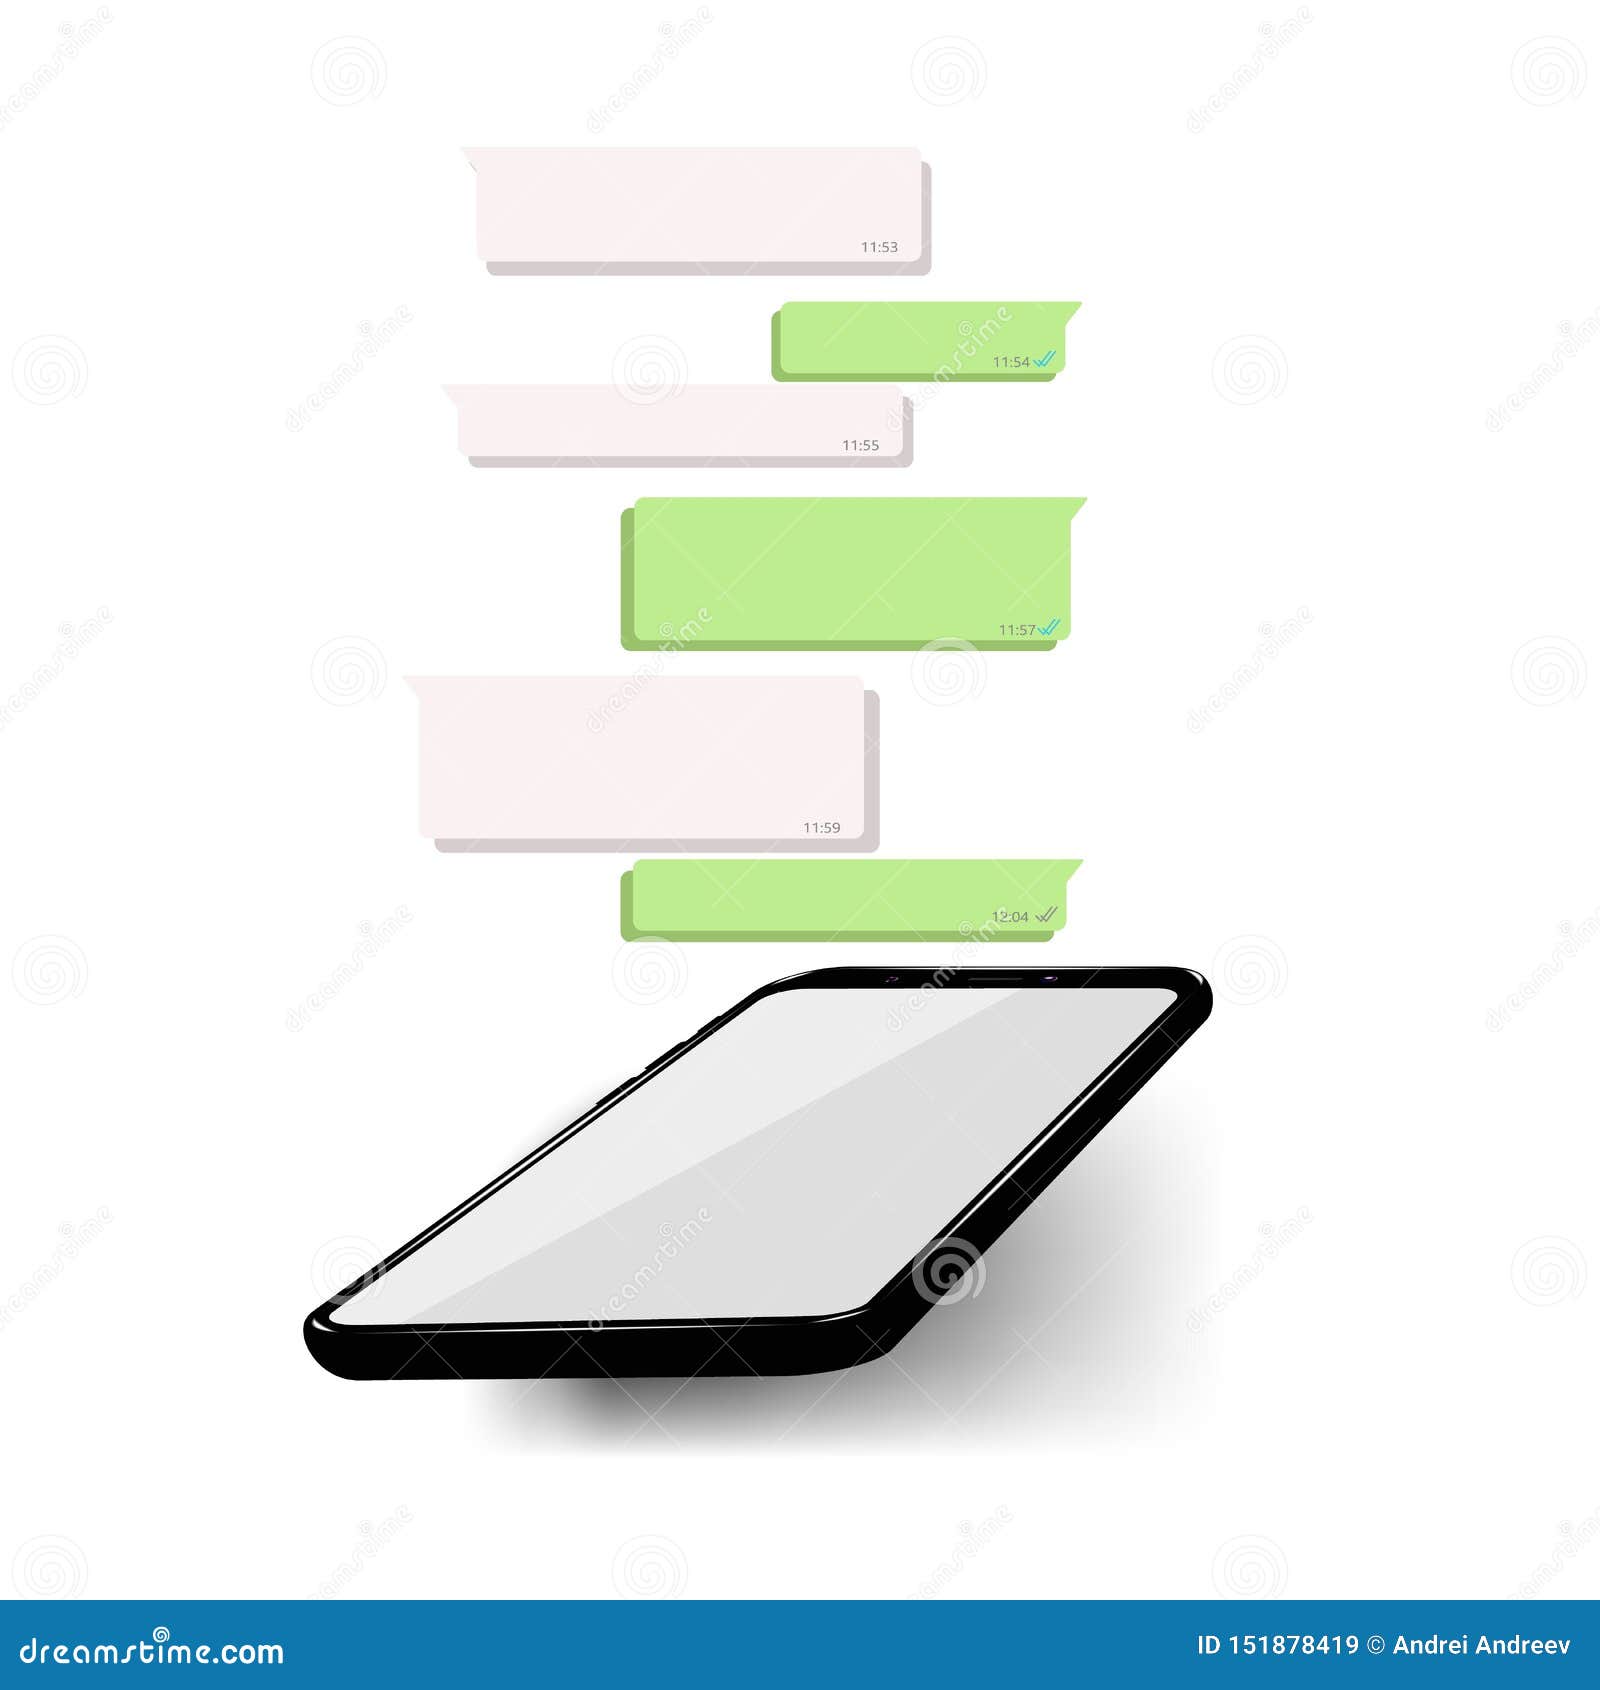 Download Mockup Of Phone With Mobile Messenger On Screen, Inspired By WhatsApp And Other Similar Apps ...